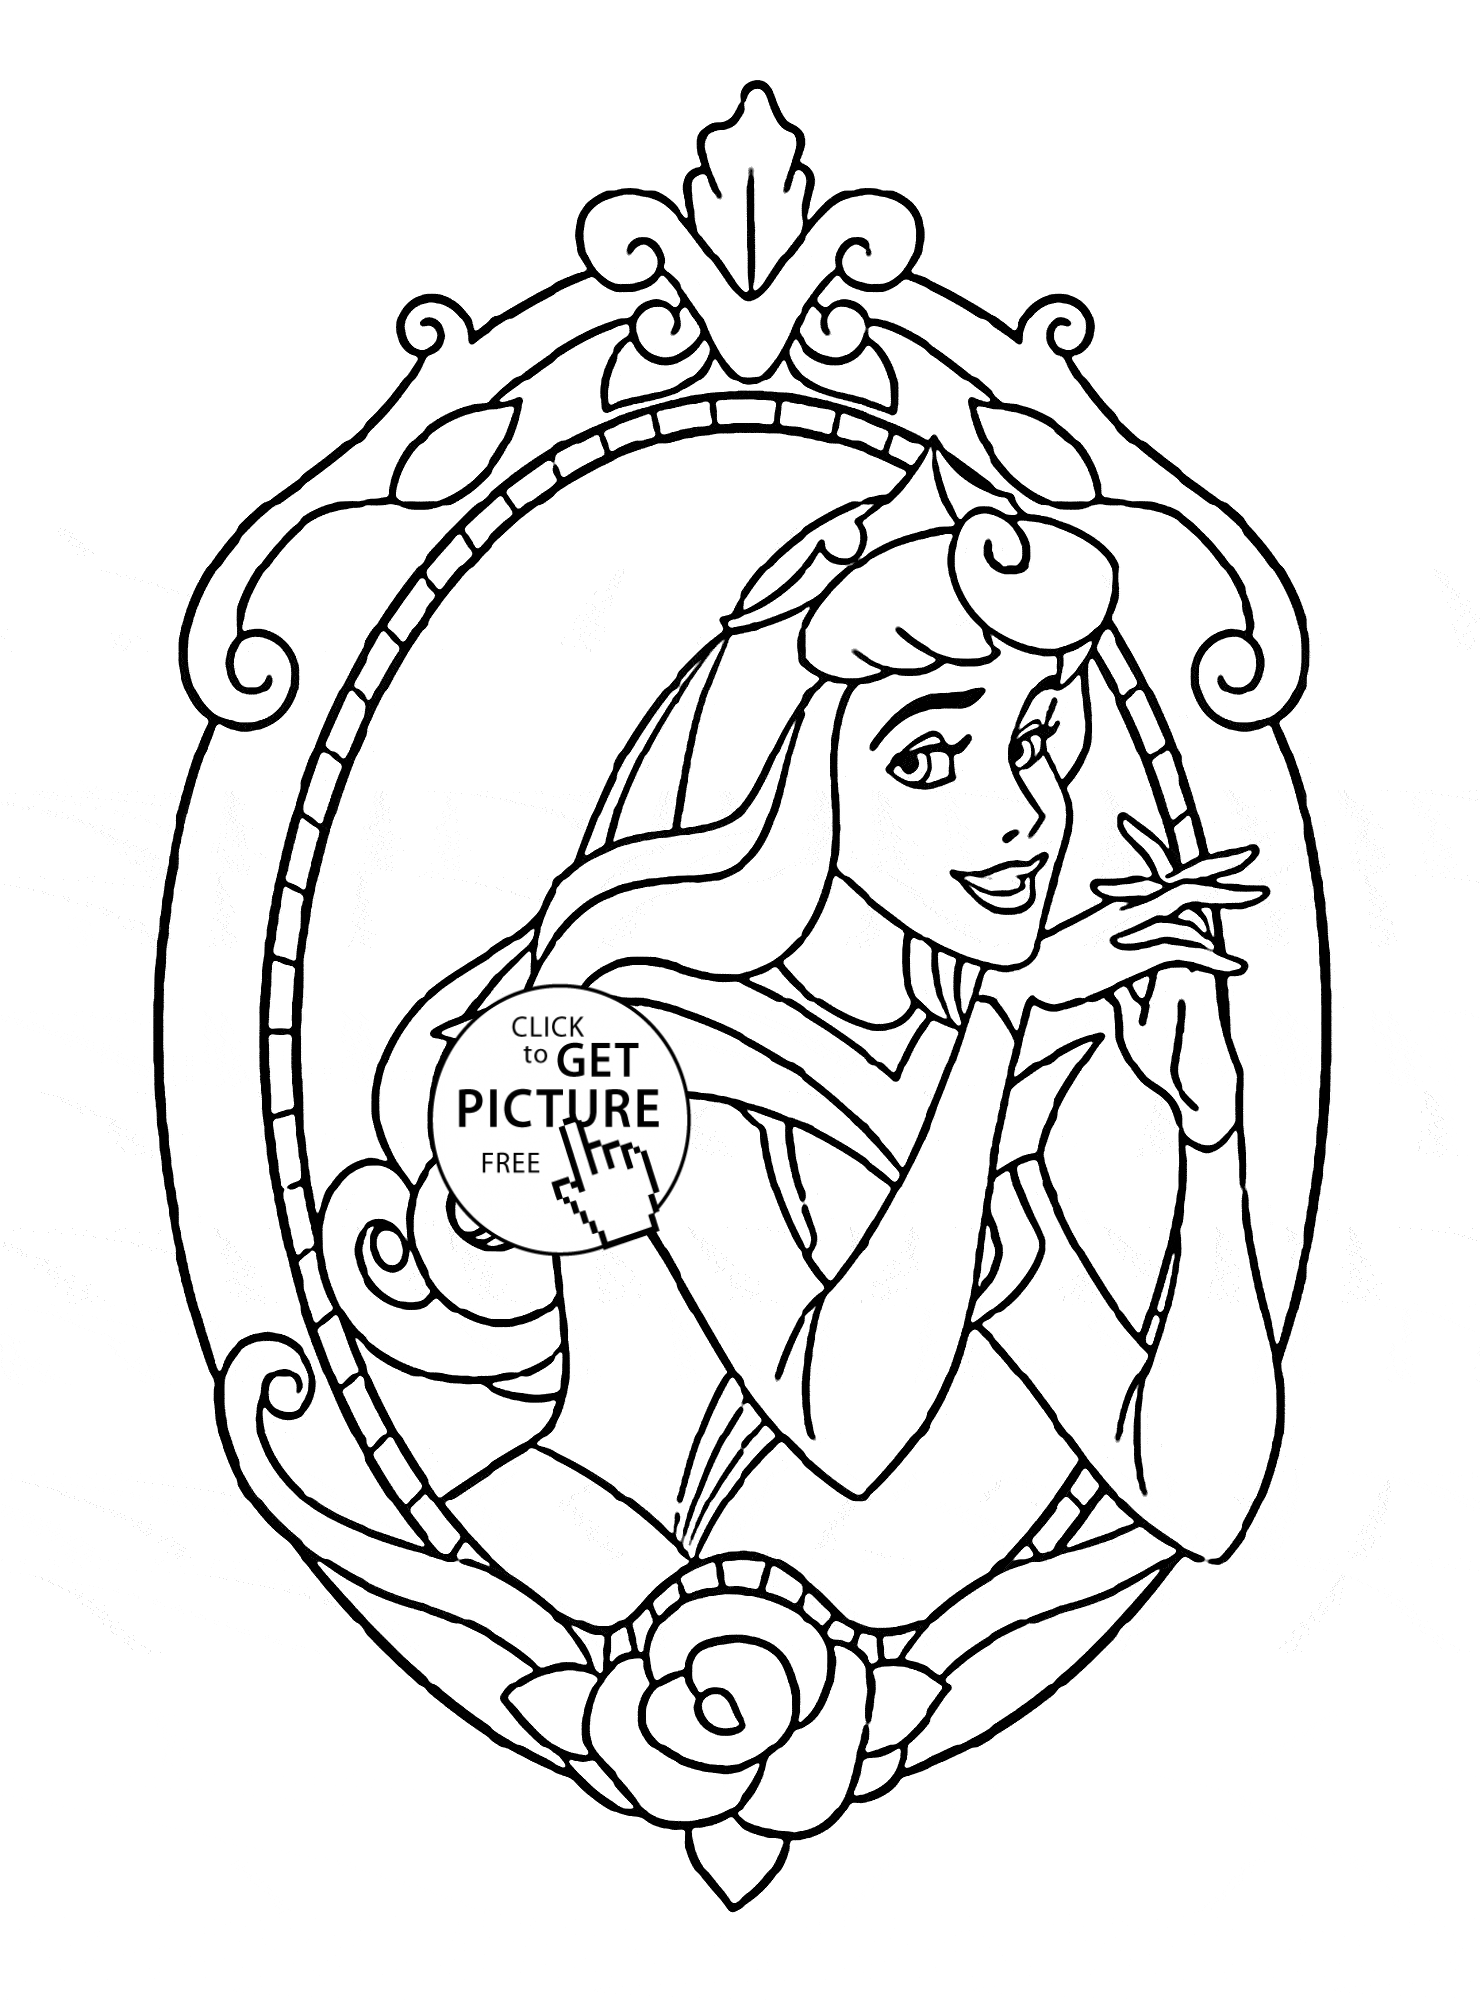 Cartoon Disney Princesses Coloring Pages   Coloring Home